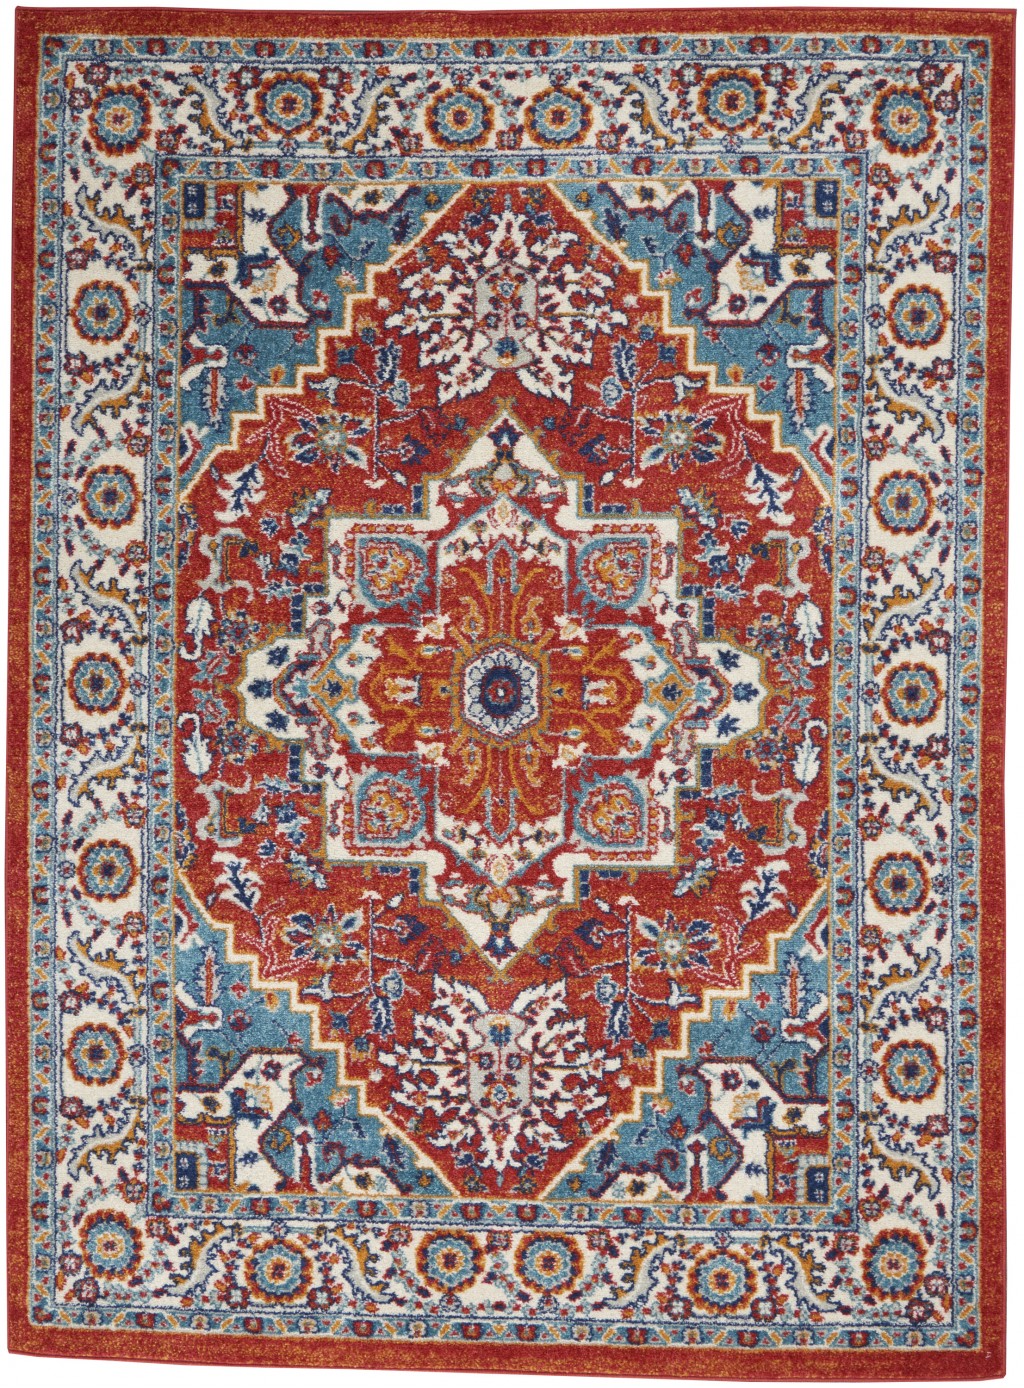 5' X 7' Red And Ivory Power Loom Area Rug-385656-1